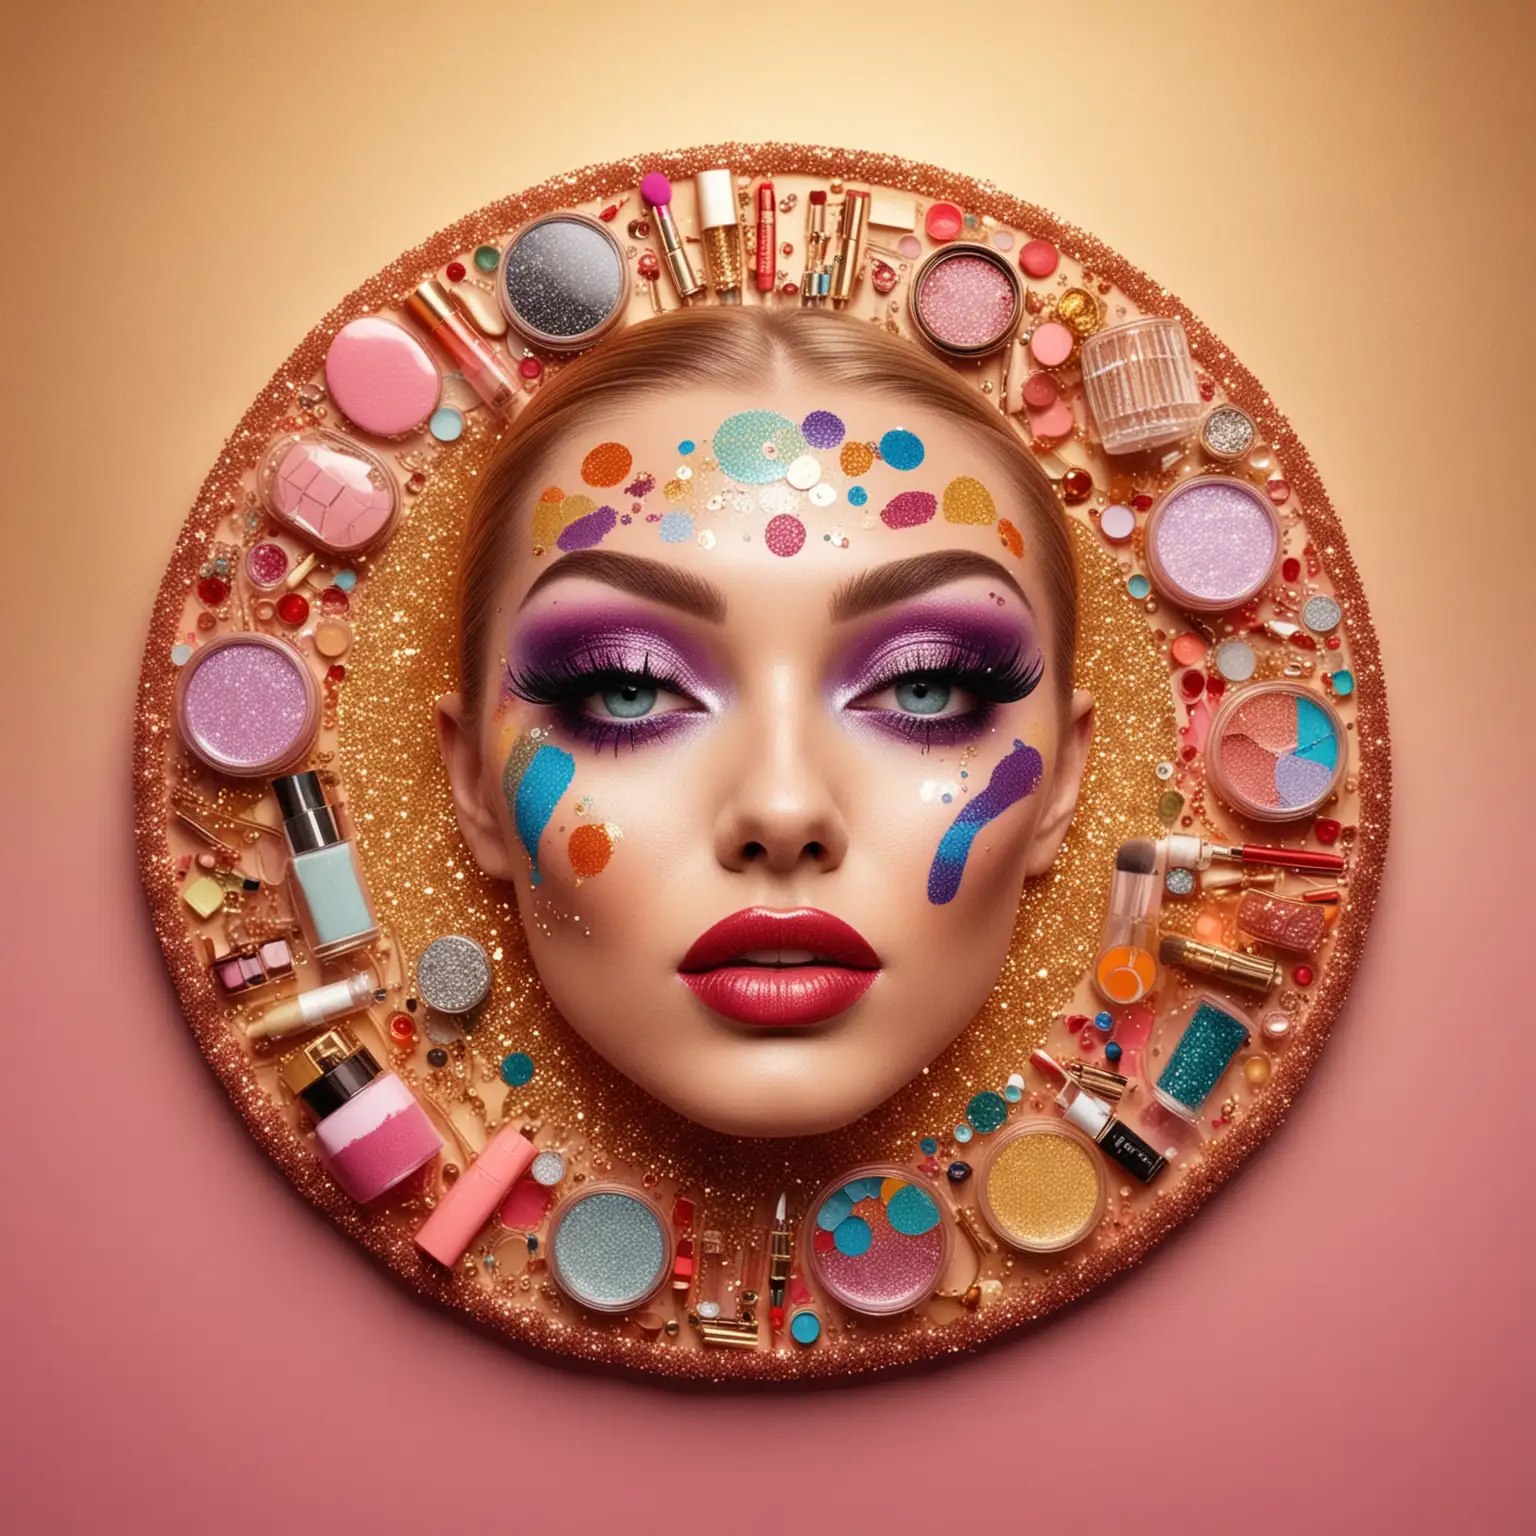 Vibrant Collage of Makeup and BDSM Supplies with Glitter and Diamonds in Pop Art Style